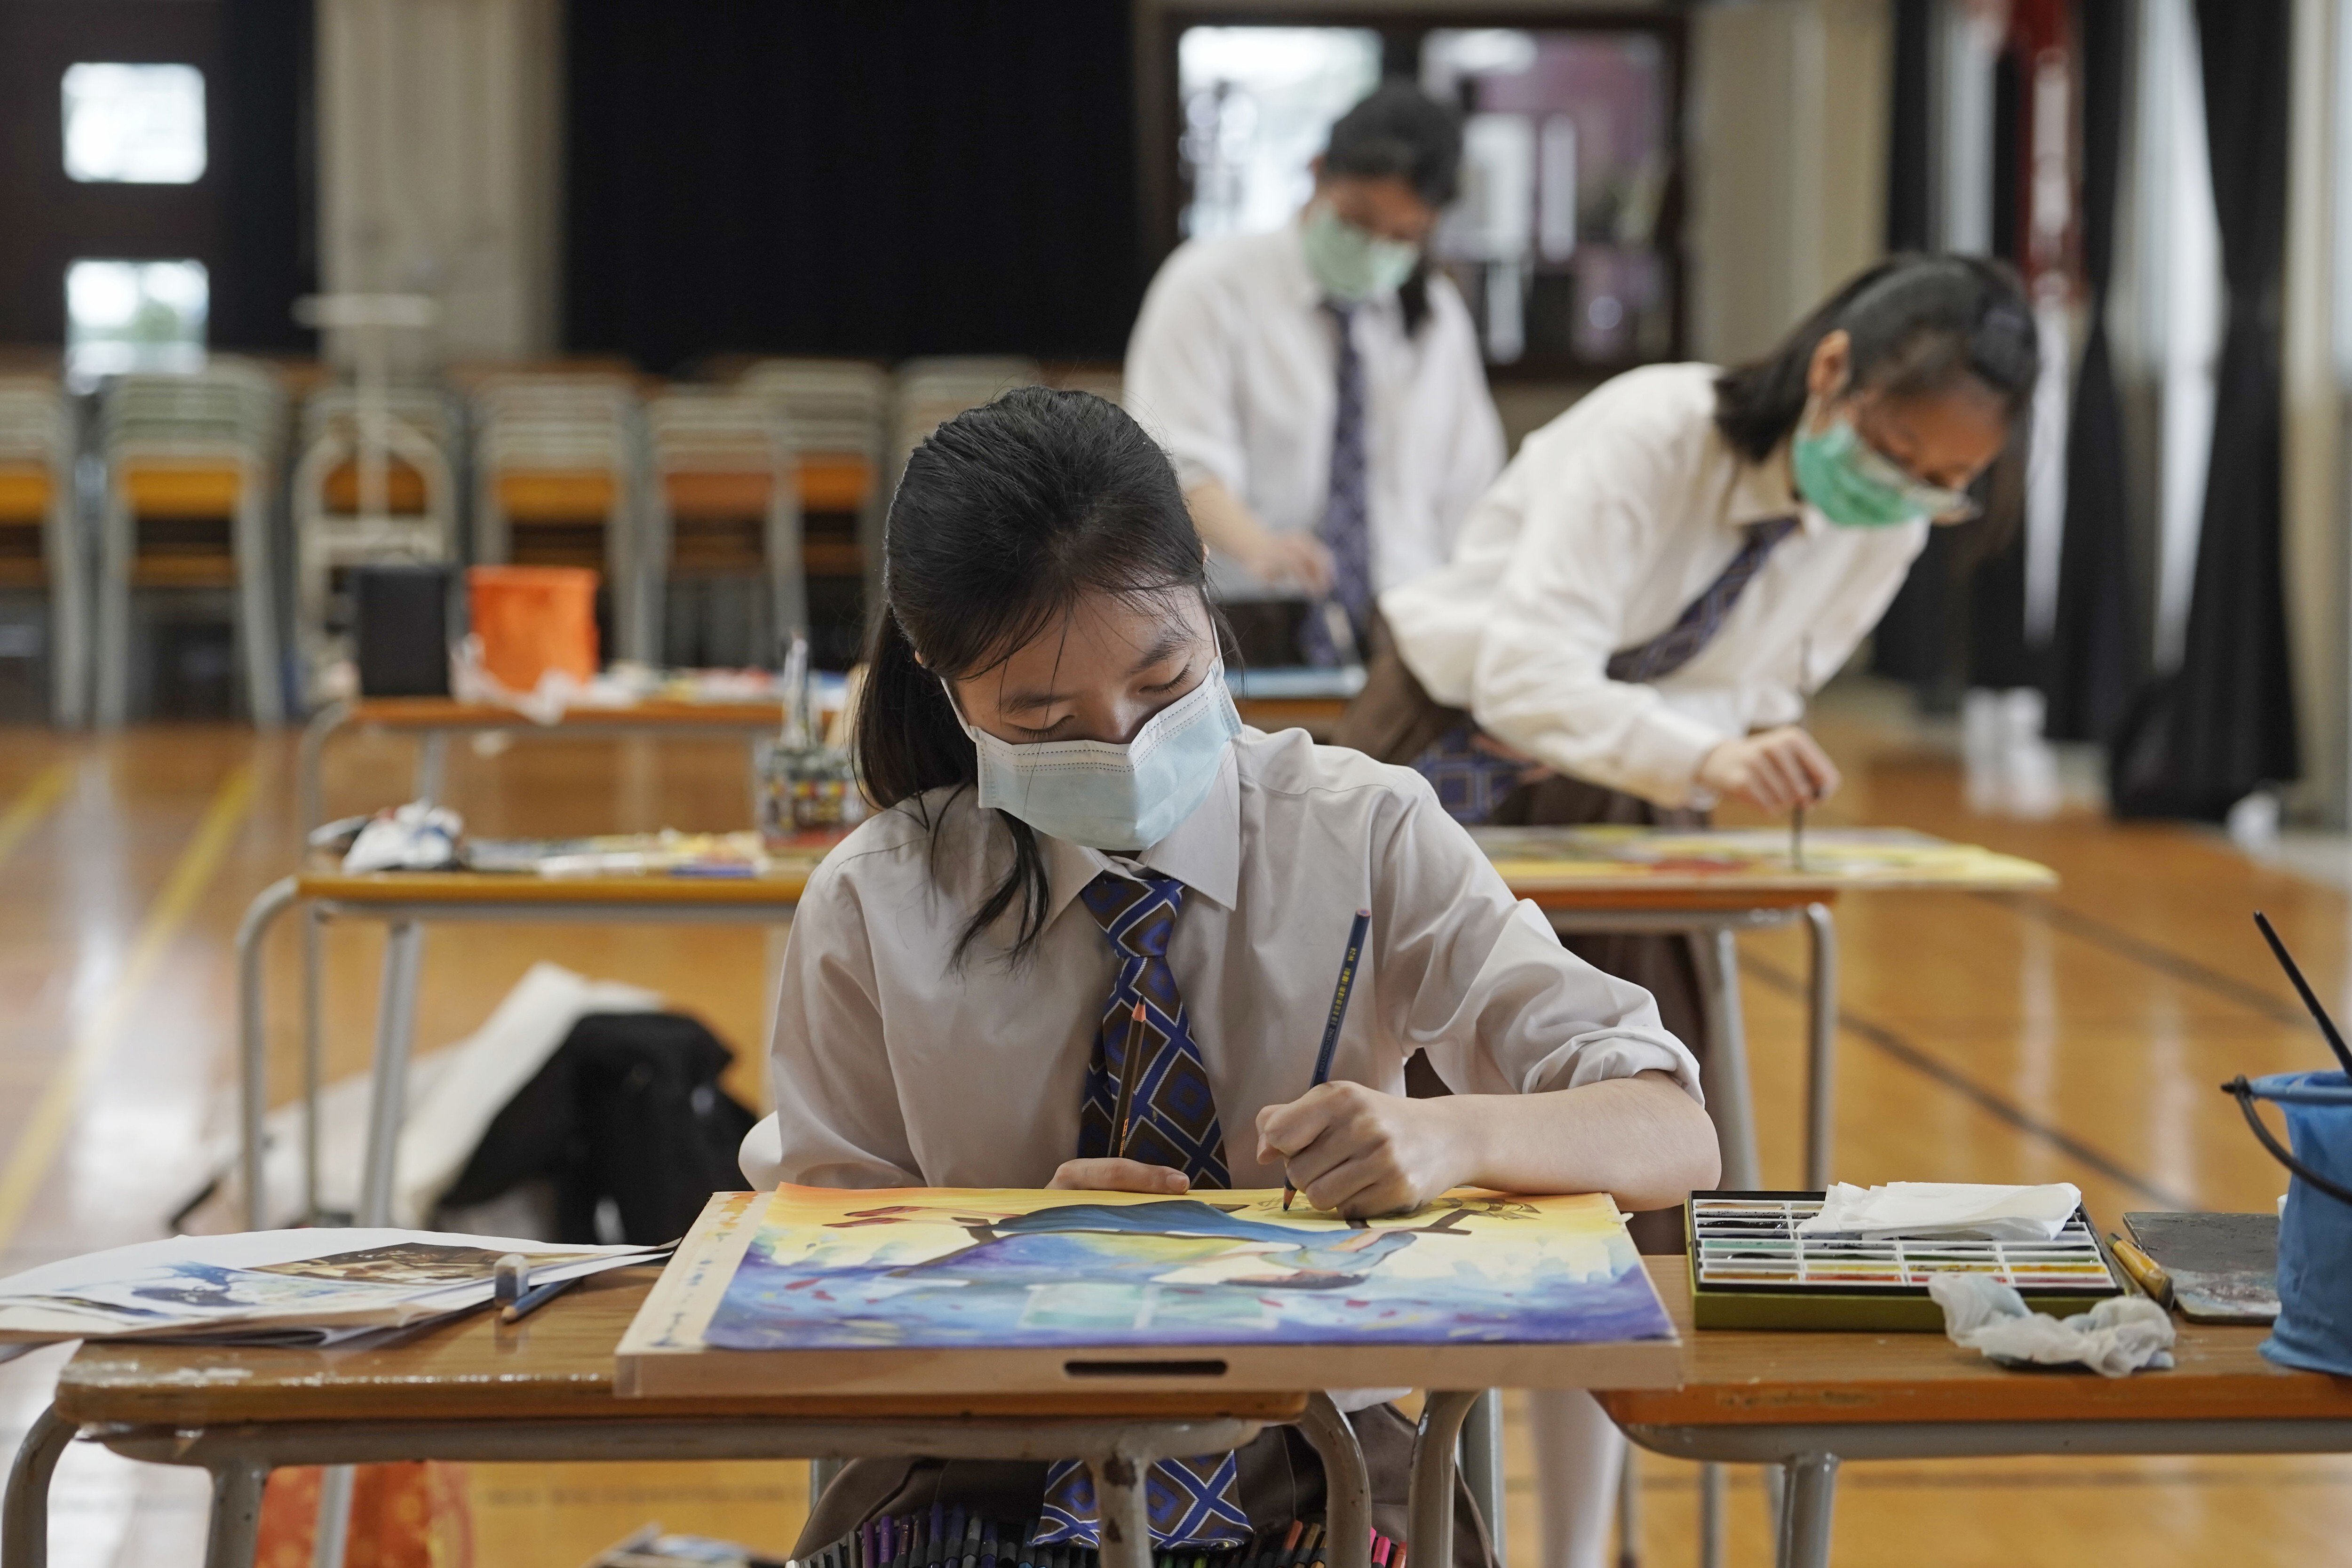 Hong Kong's university entrance examinations have started with social-distancing measures. Photo: AP